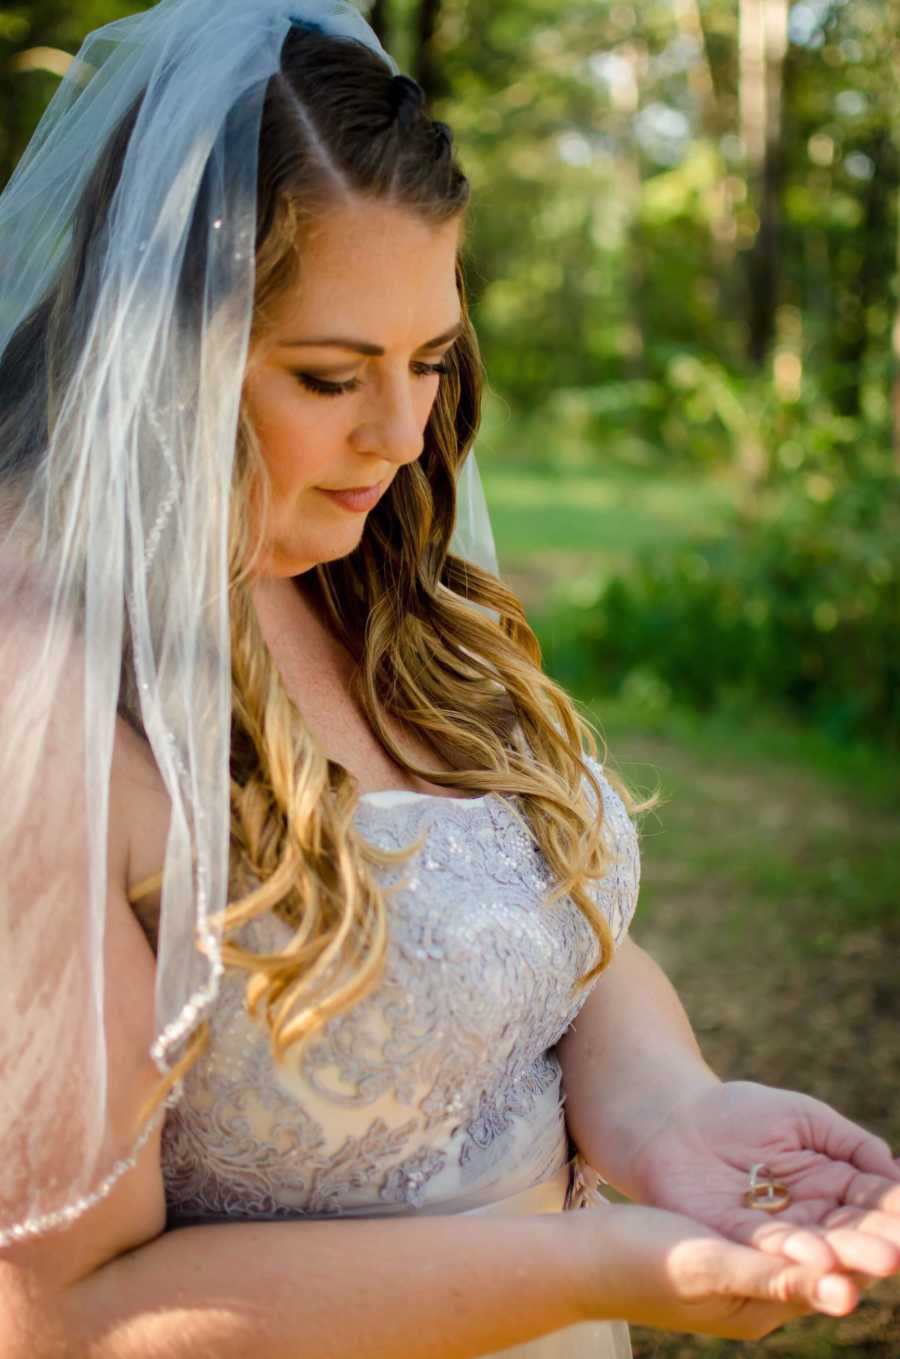 Close up of woman in wedding gown looking down at her hands where she holds her deceased husband's wedding ring